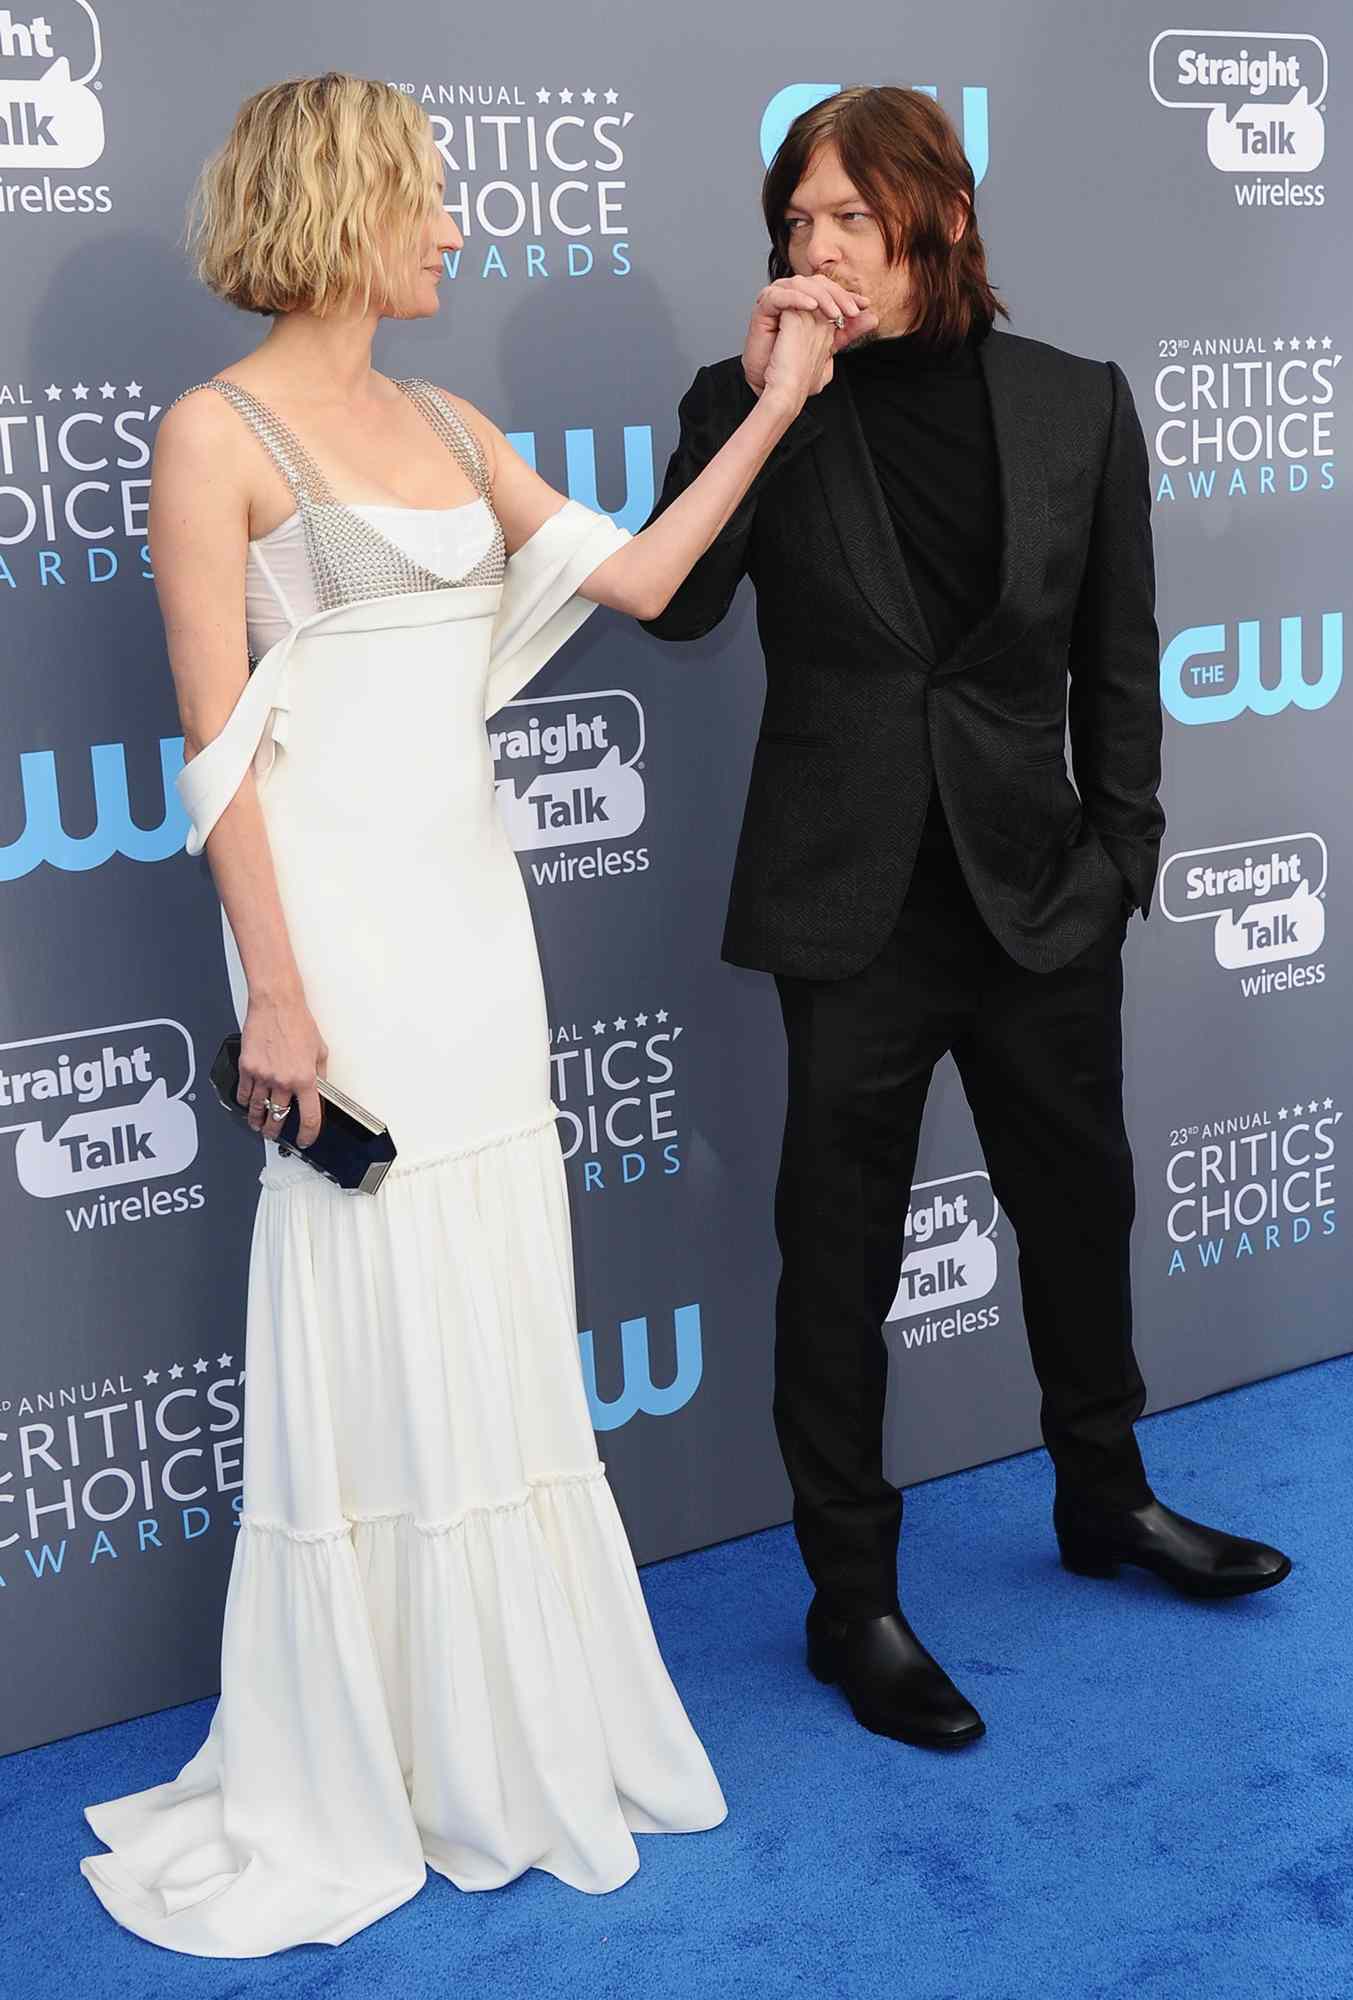 Diane Kruger (L) and Norman Reedus attend The 23rd Annual Critics' Choice Awards at Barker Hangar on January 11, 2018 in Santa Monica, California